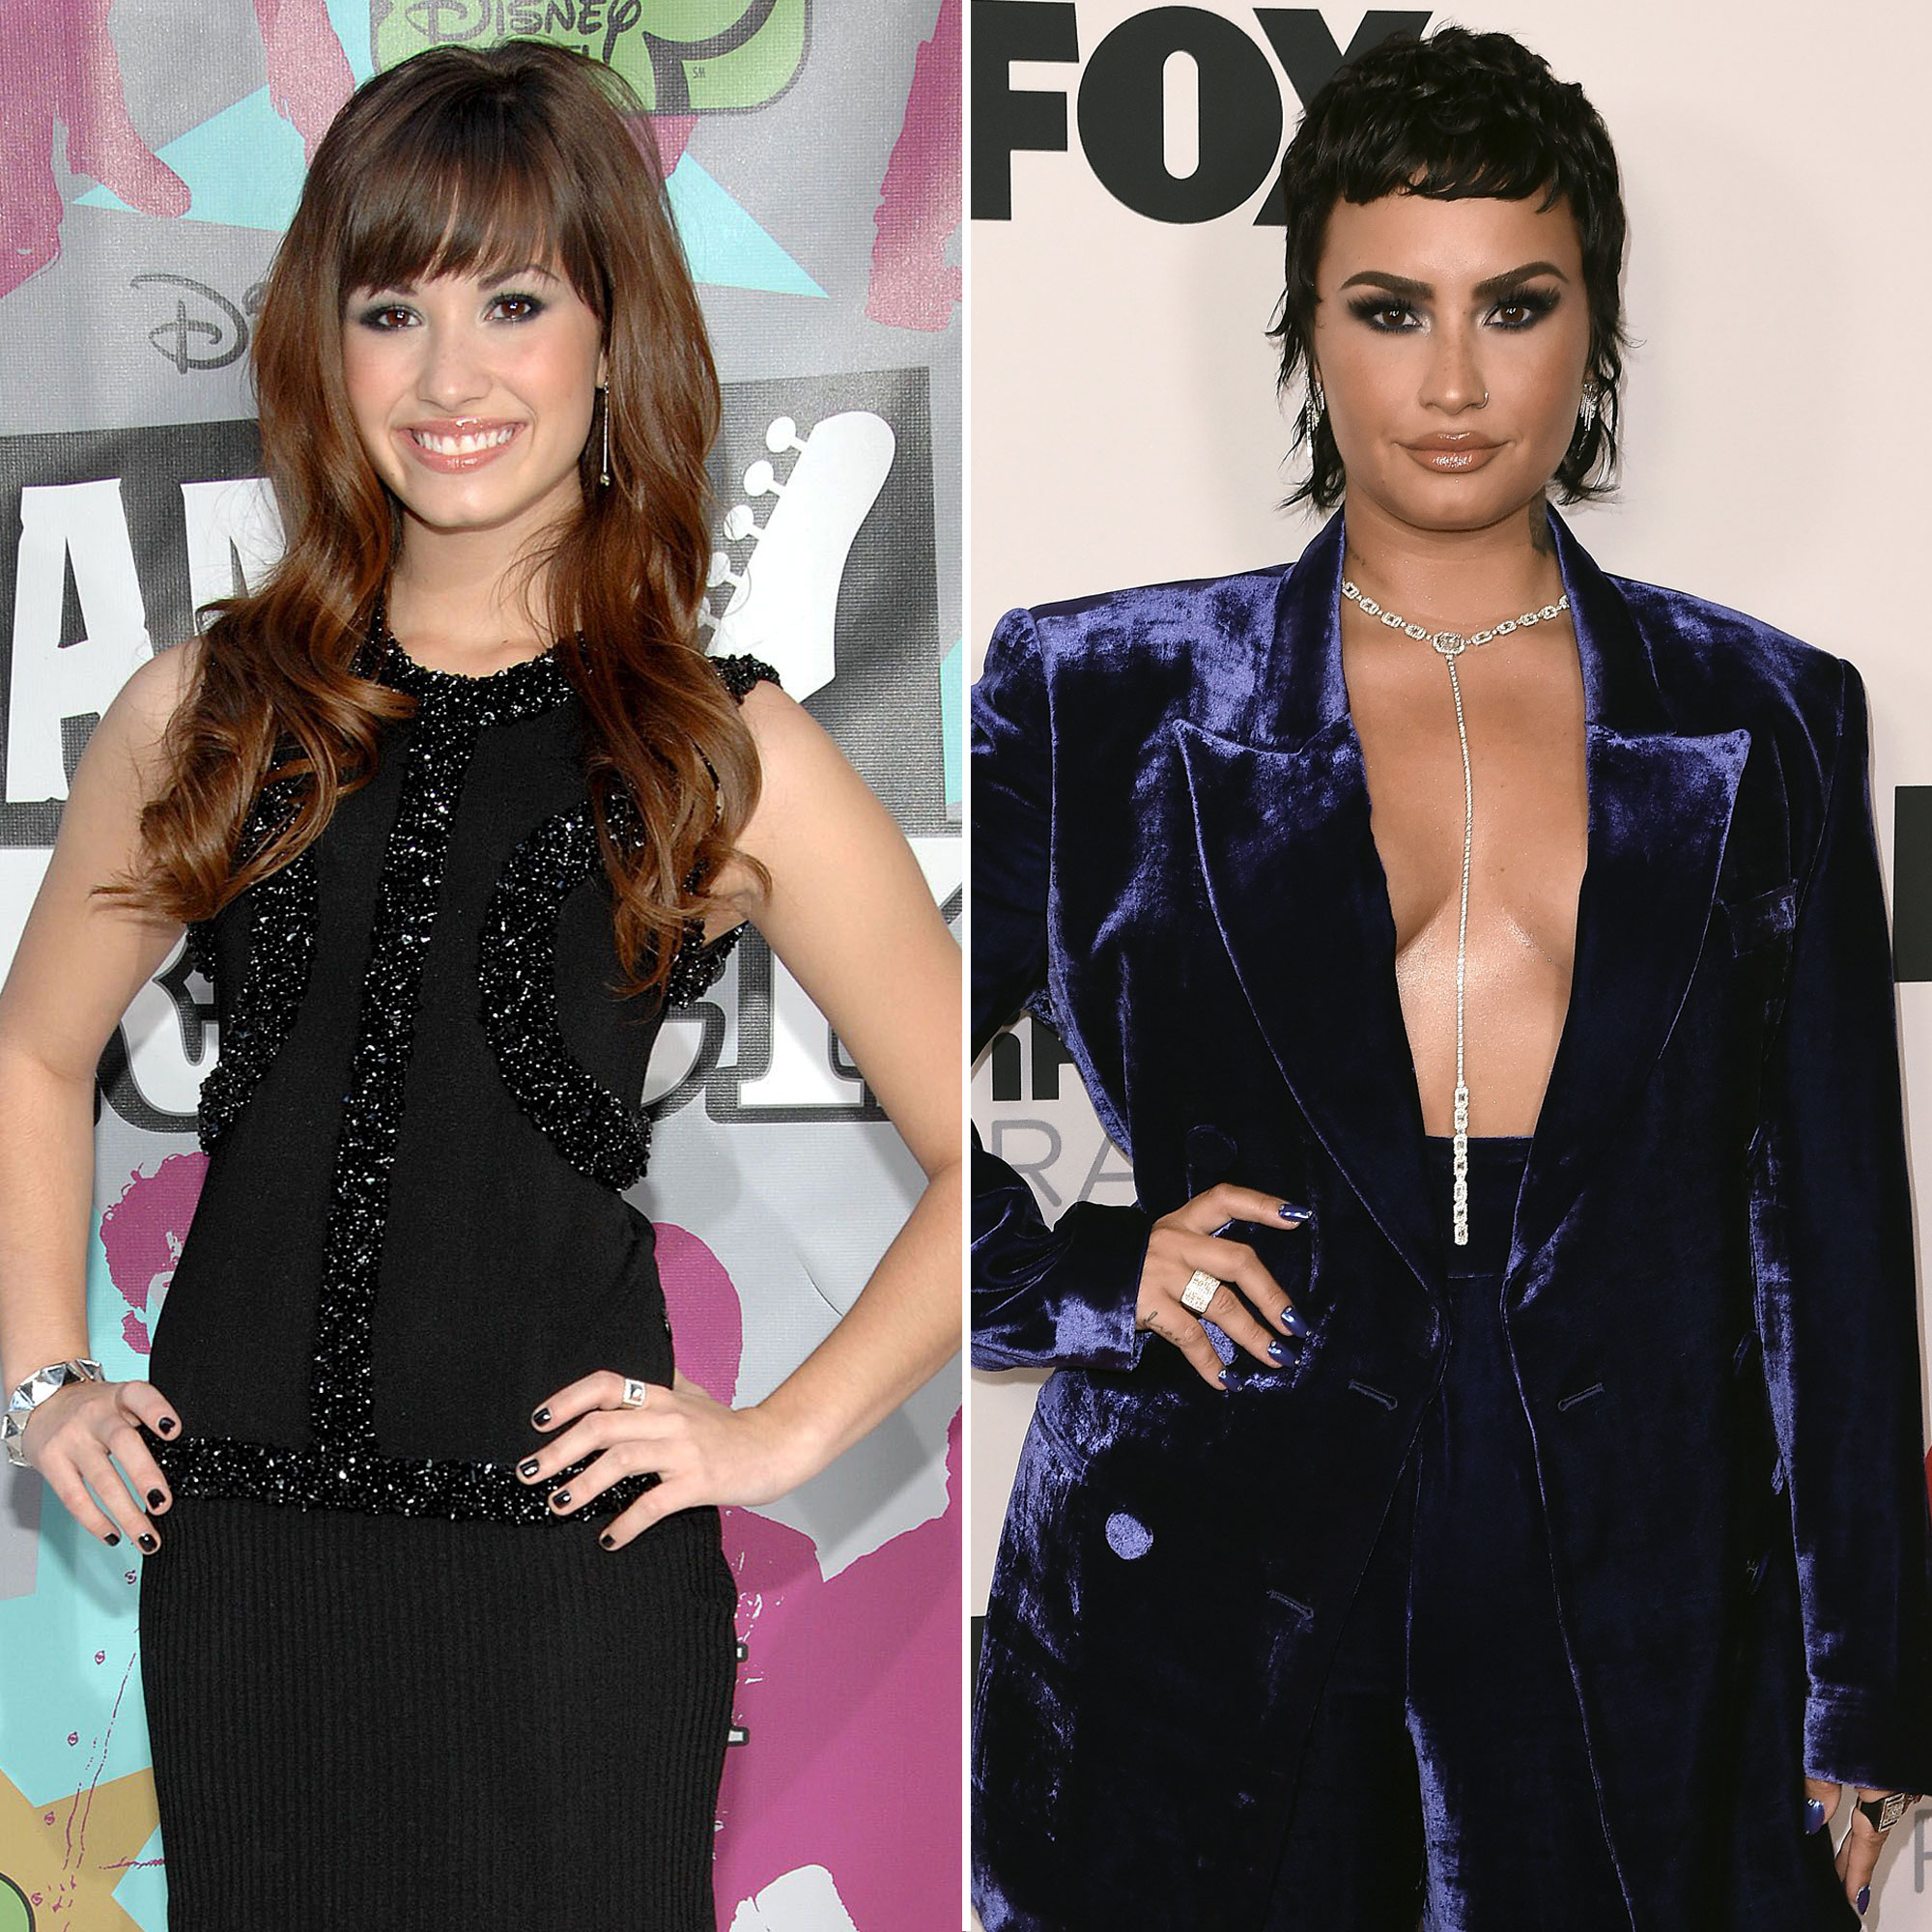 Demi Lovato Selena Gomez Real Porn - Celebrities Who Have Regrets About Their Time as Child Stars